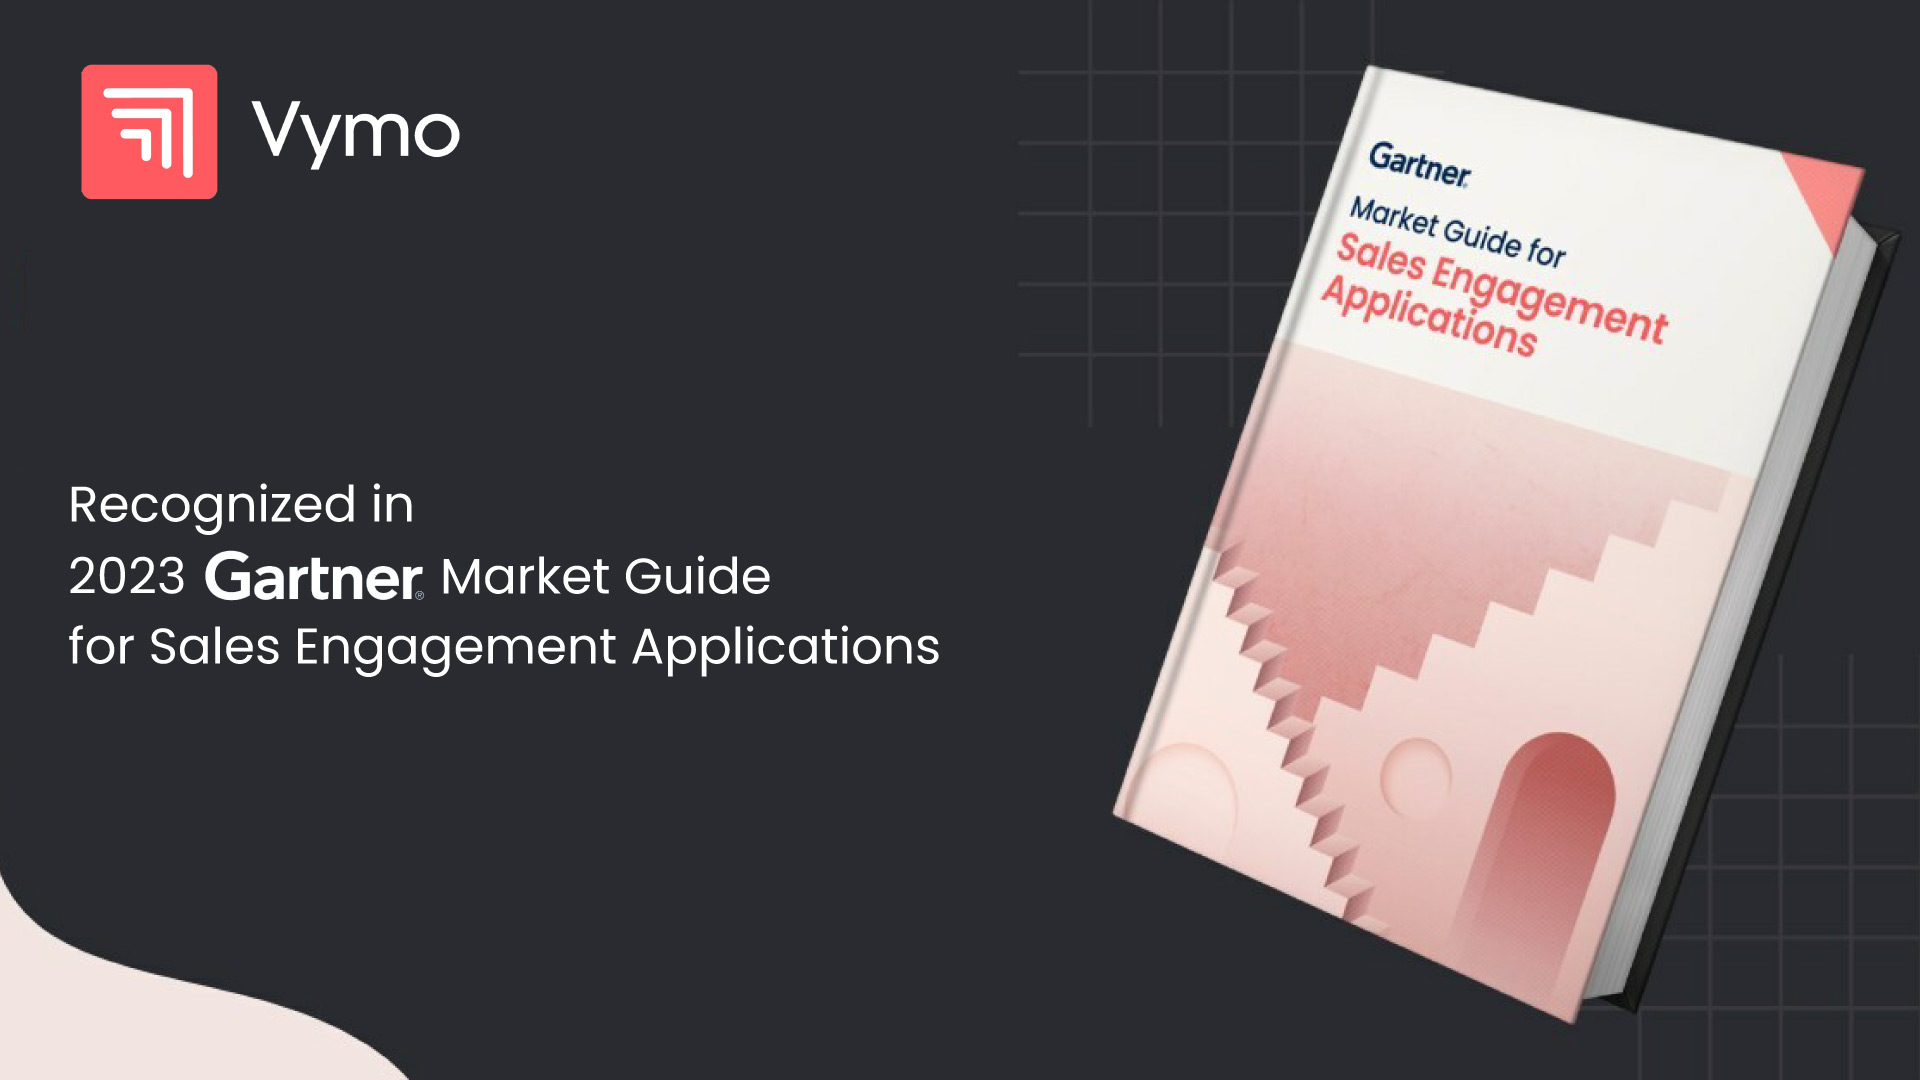 Vymo recognized in the 2023 Gartner® Market Guide for Sales Engagement Applications